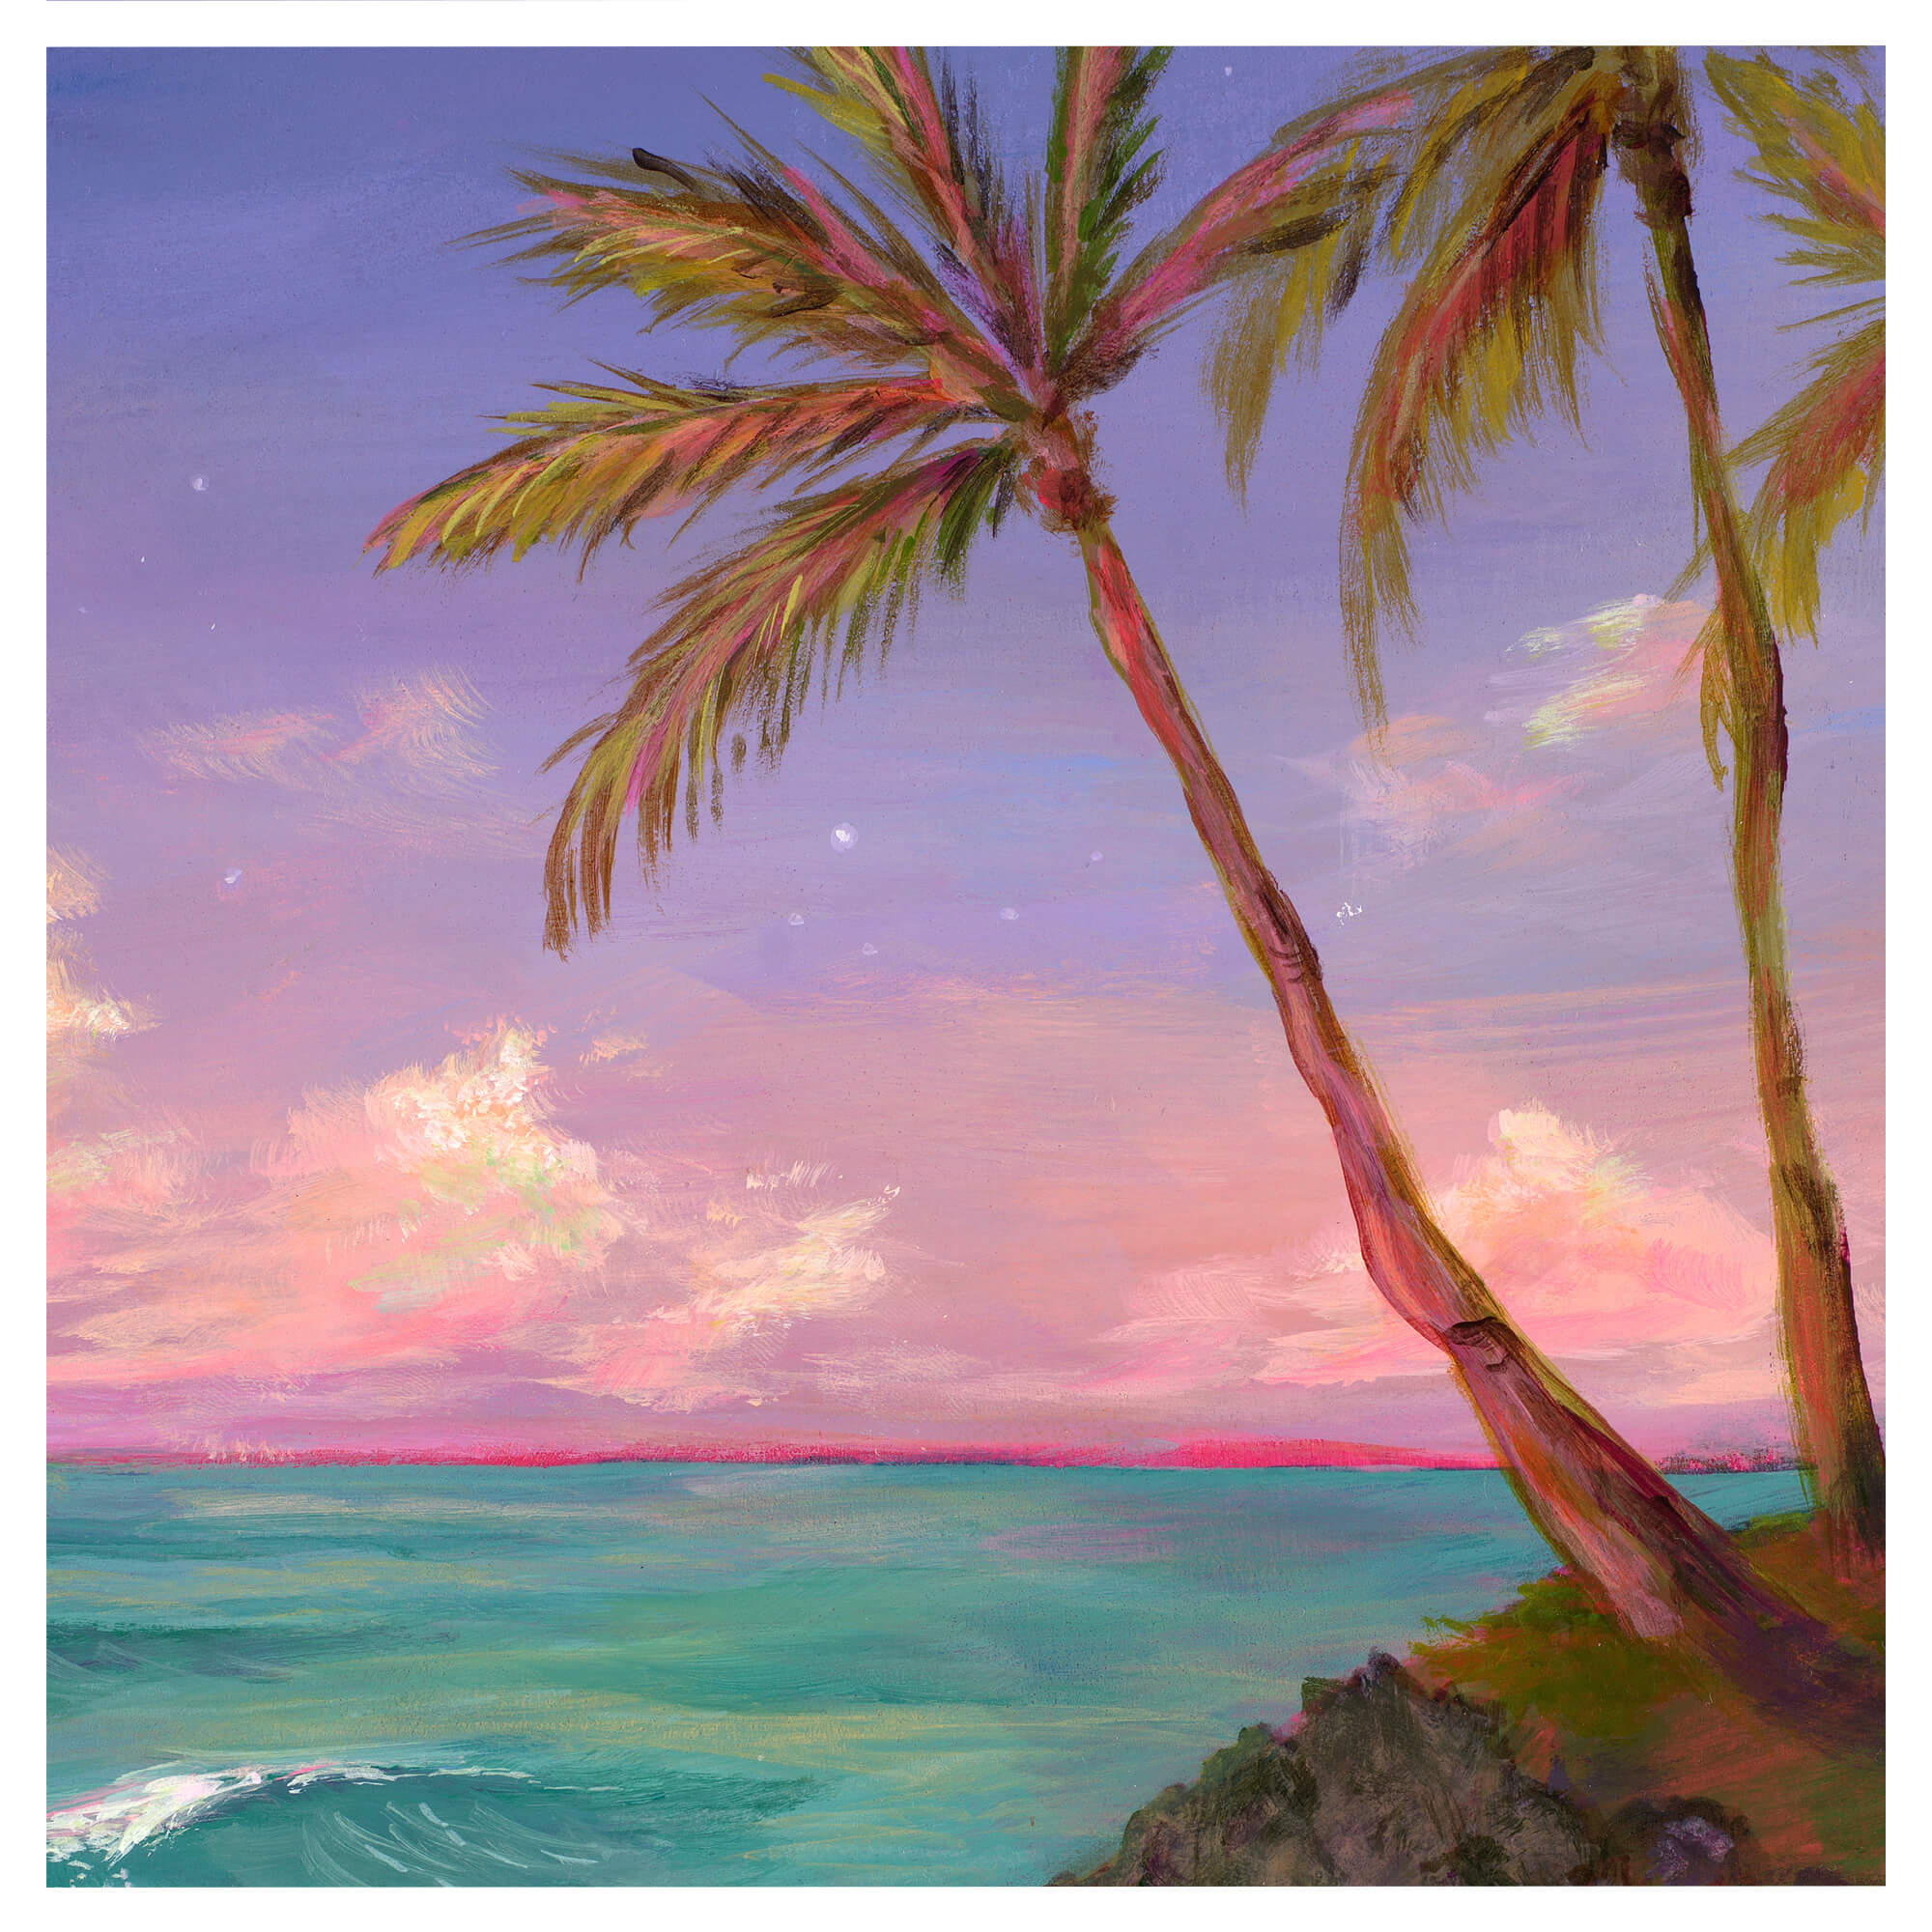 Coconut trees, purple  and pink sky with stars by Hawaii artist Lindsay Wilkins